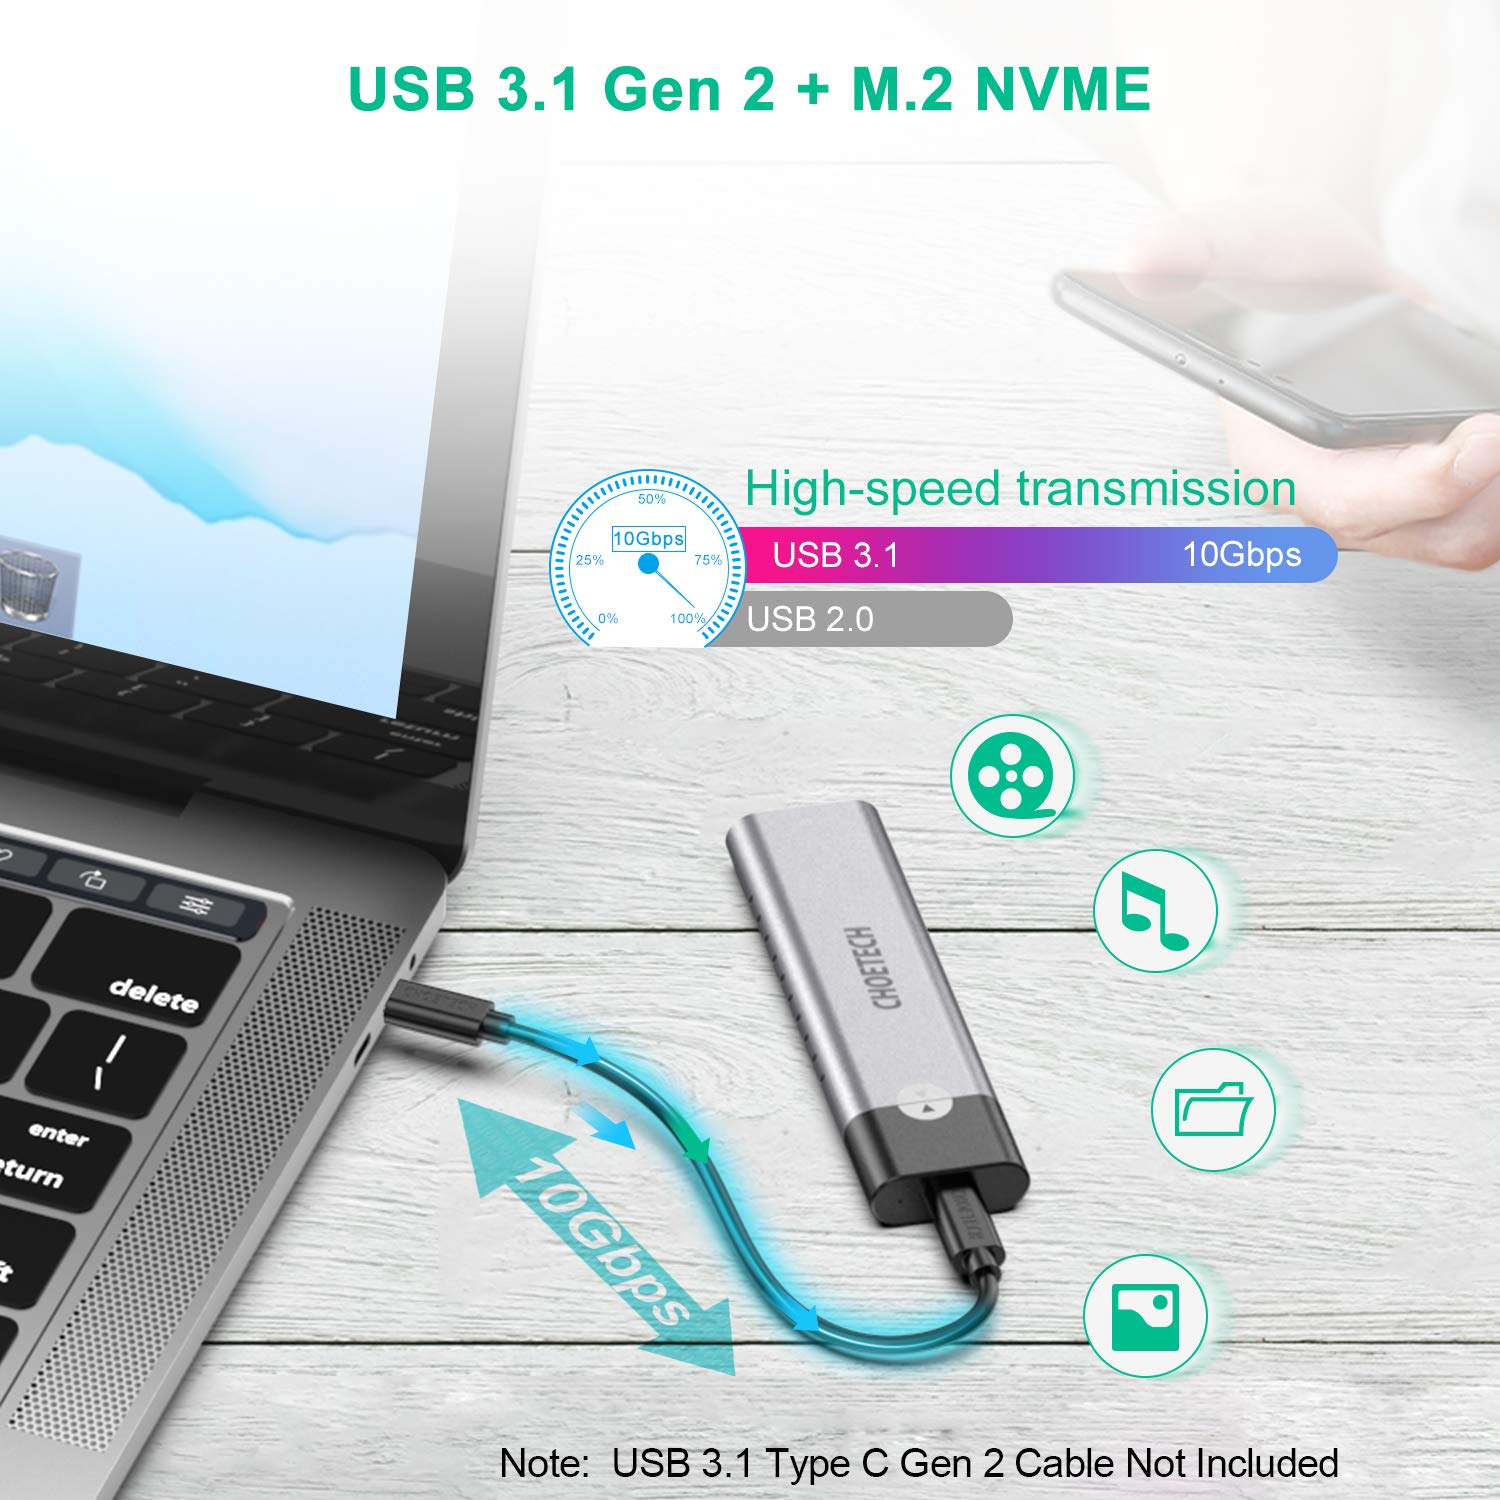 PC-HDE03 New Generation NVMe PCIe M.2 SSD to USB 3.1 Type C Gen 2 Adapter and Enclosure